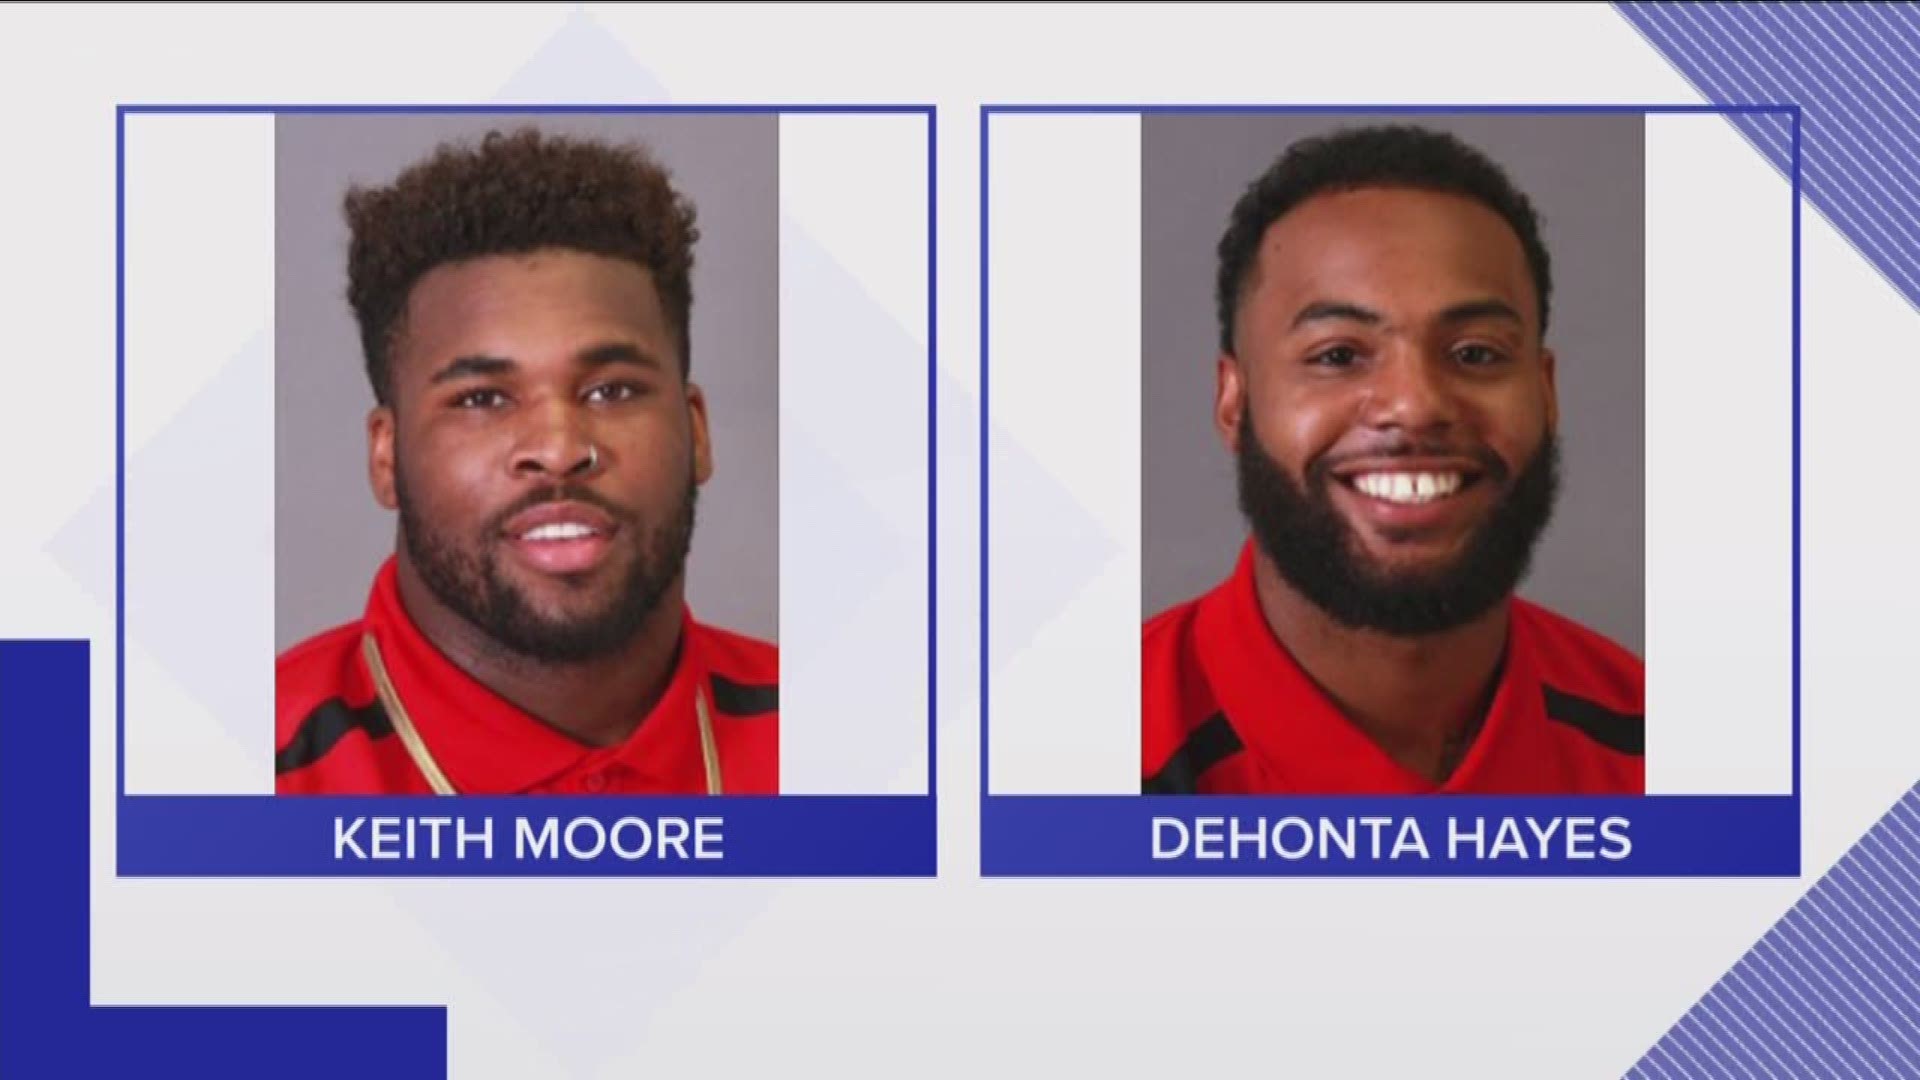 EWU football players Dehonta Hayes and Keith Moore, who were shot in downtown Spokane on Saturday, are listed as projected starters for the 2019 season.